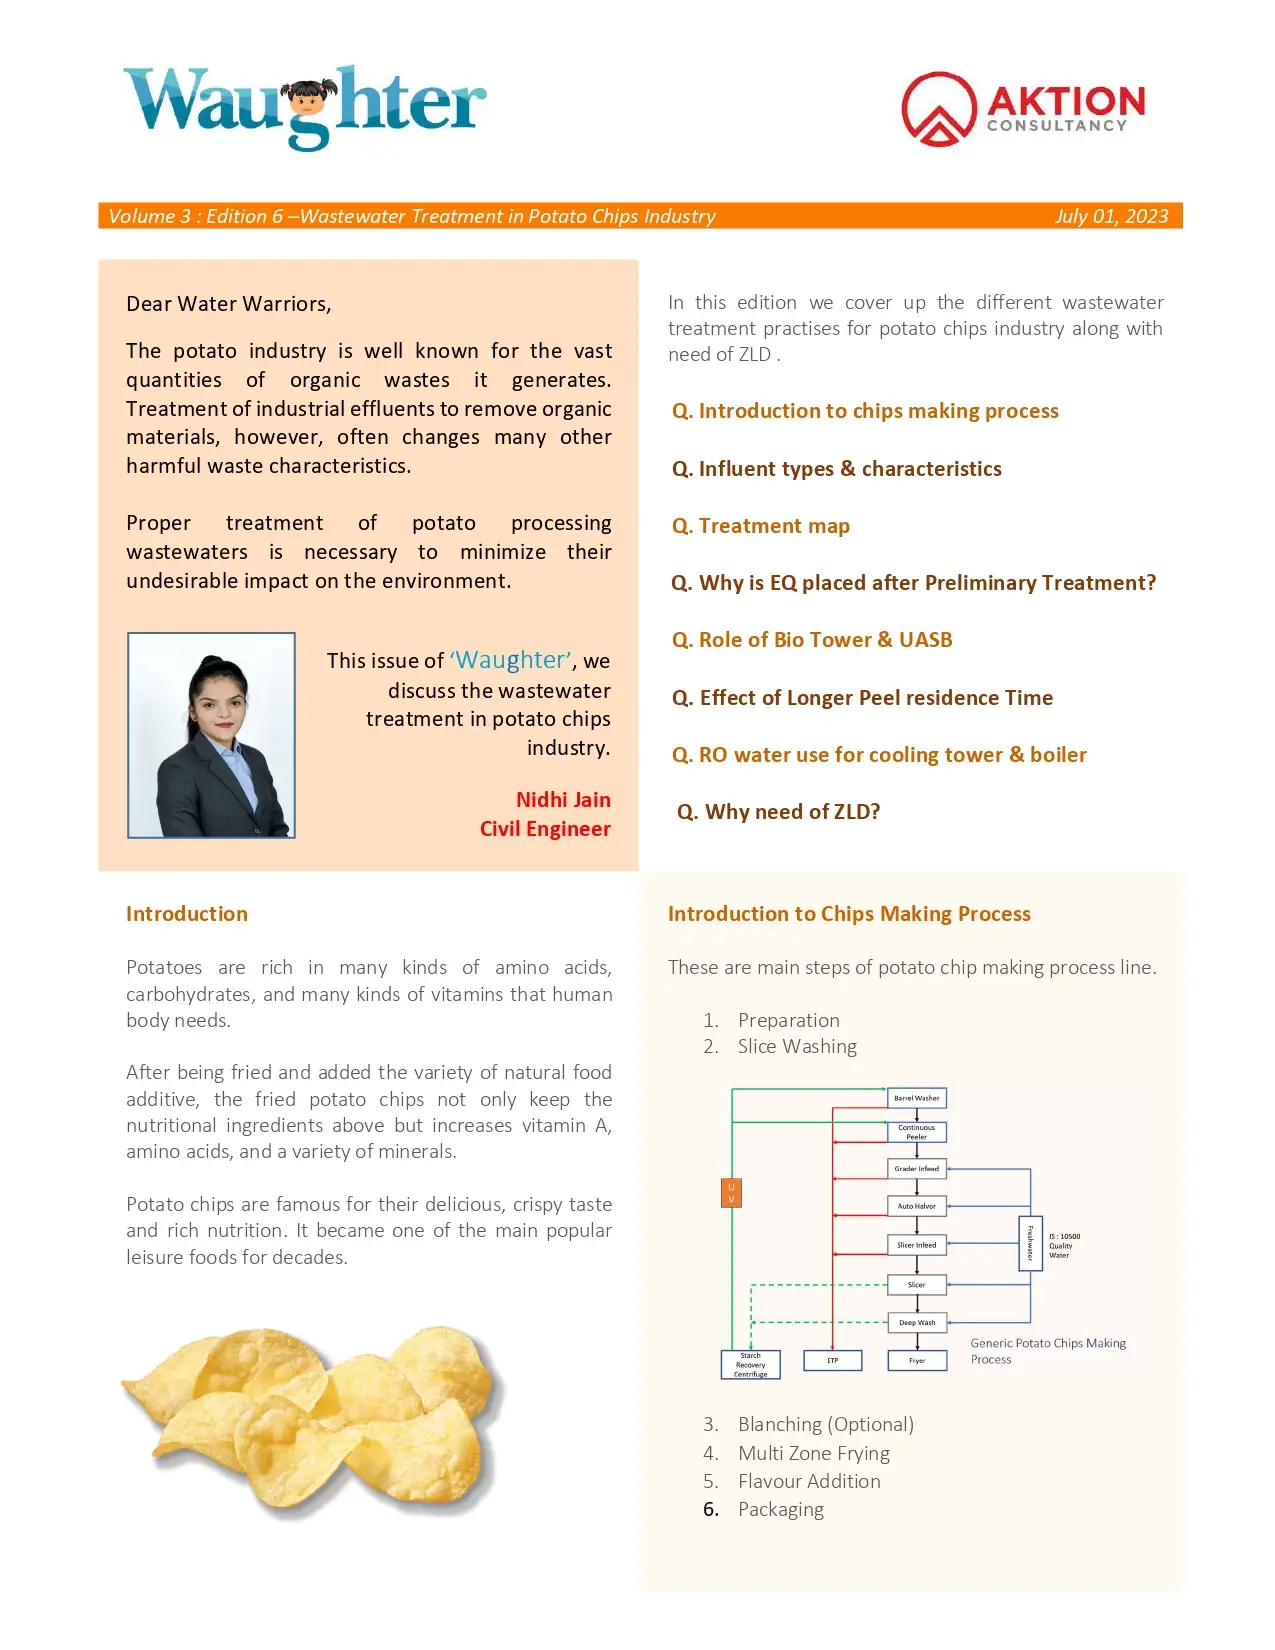 Wastewater Treatment in Potato Chips Industry